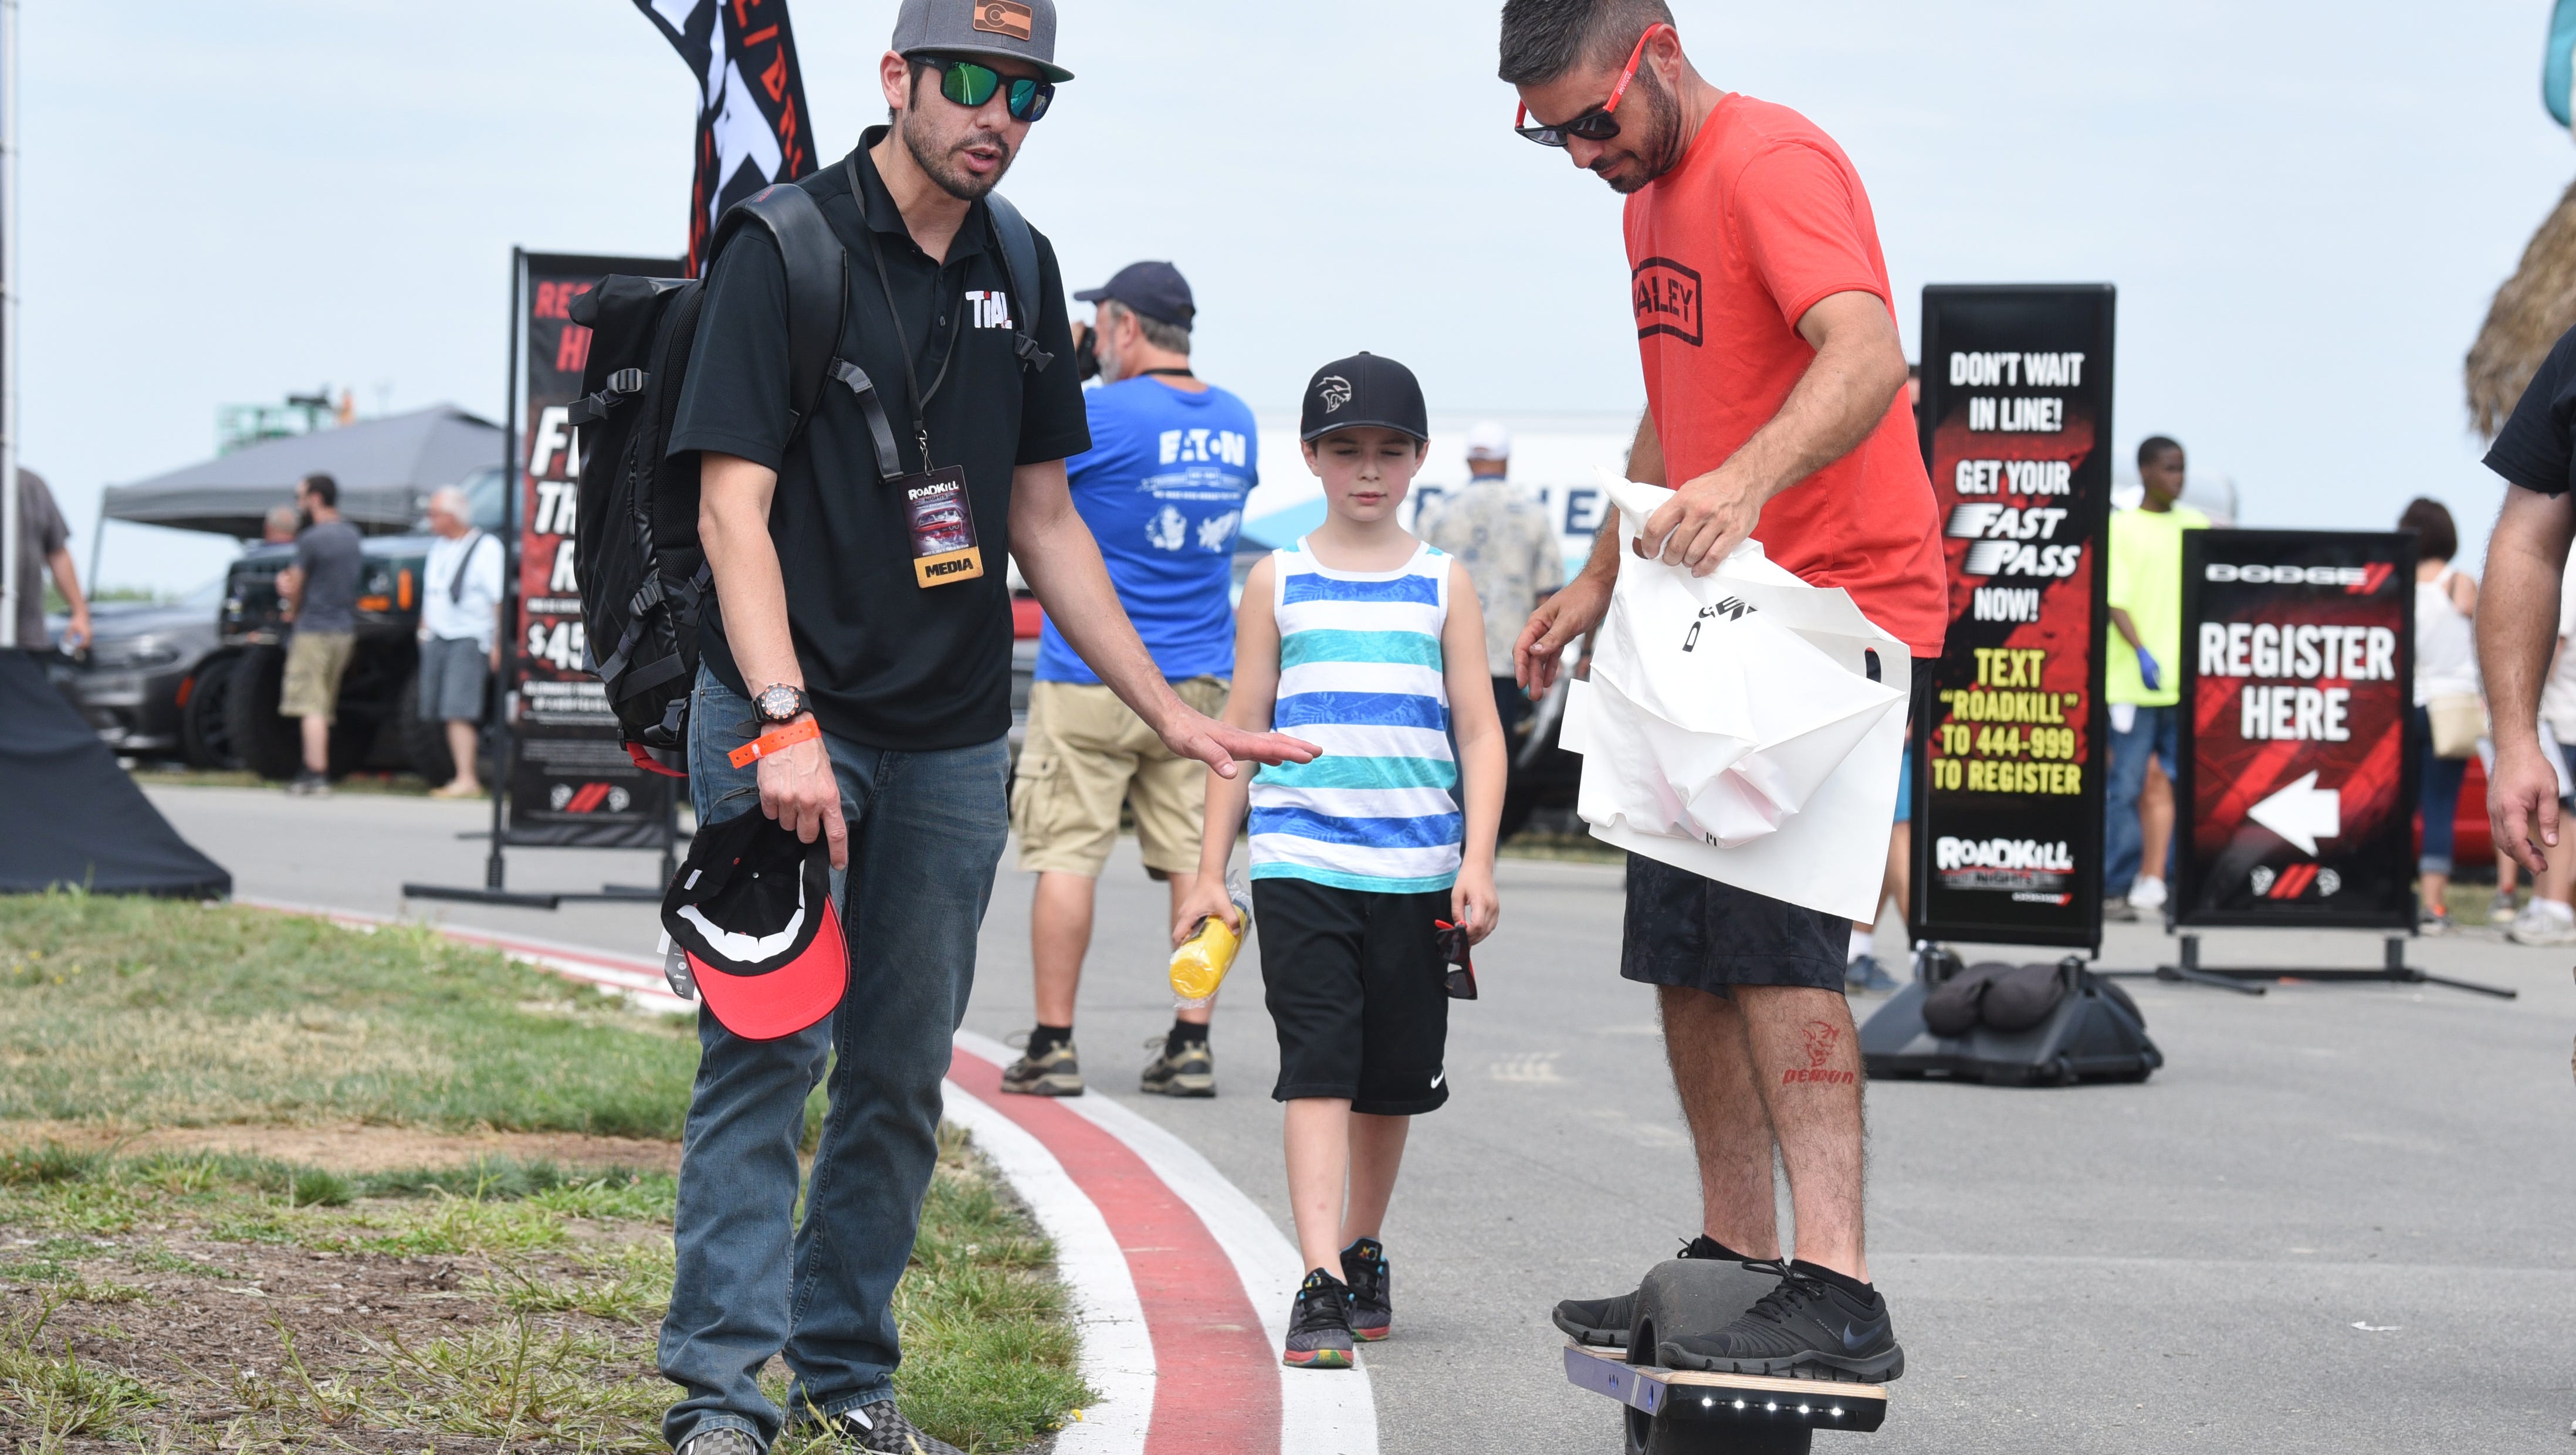 David Elwell (left) helps a fan balance on an electric skateboard called the "one wheel" at the Roadkill Nights held at M1 Concourse in Pontiac on Saturday, August 11, 2018